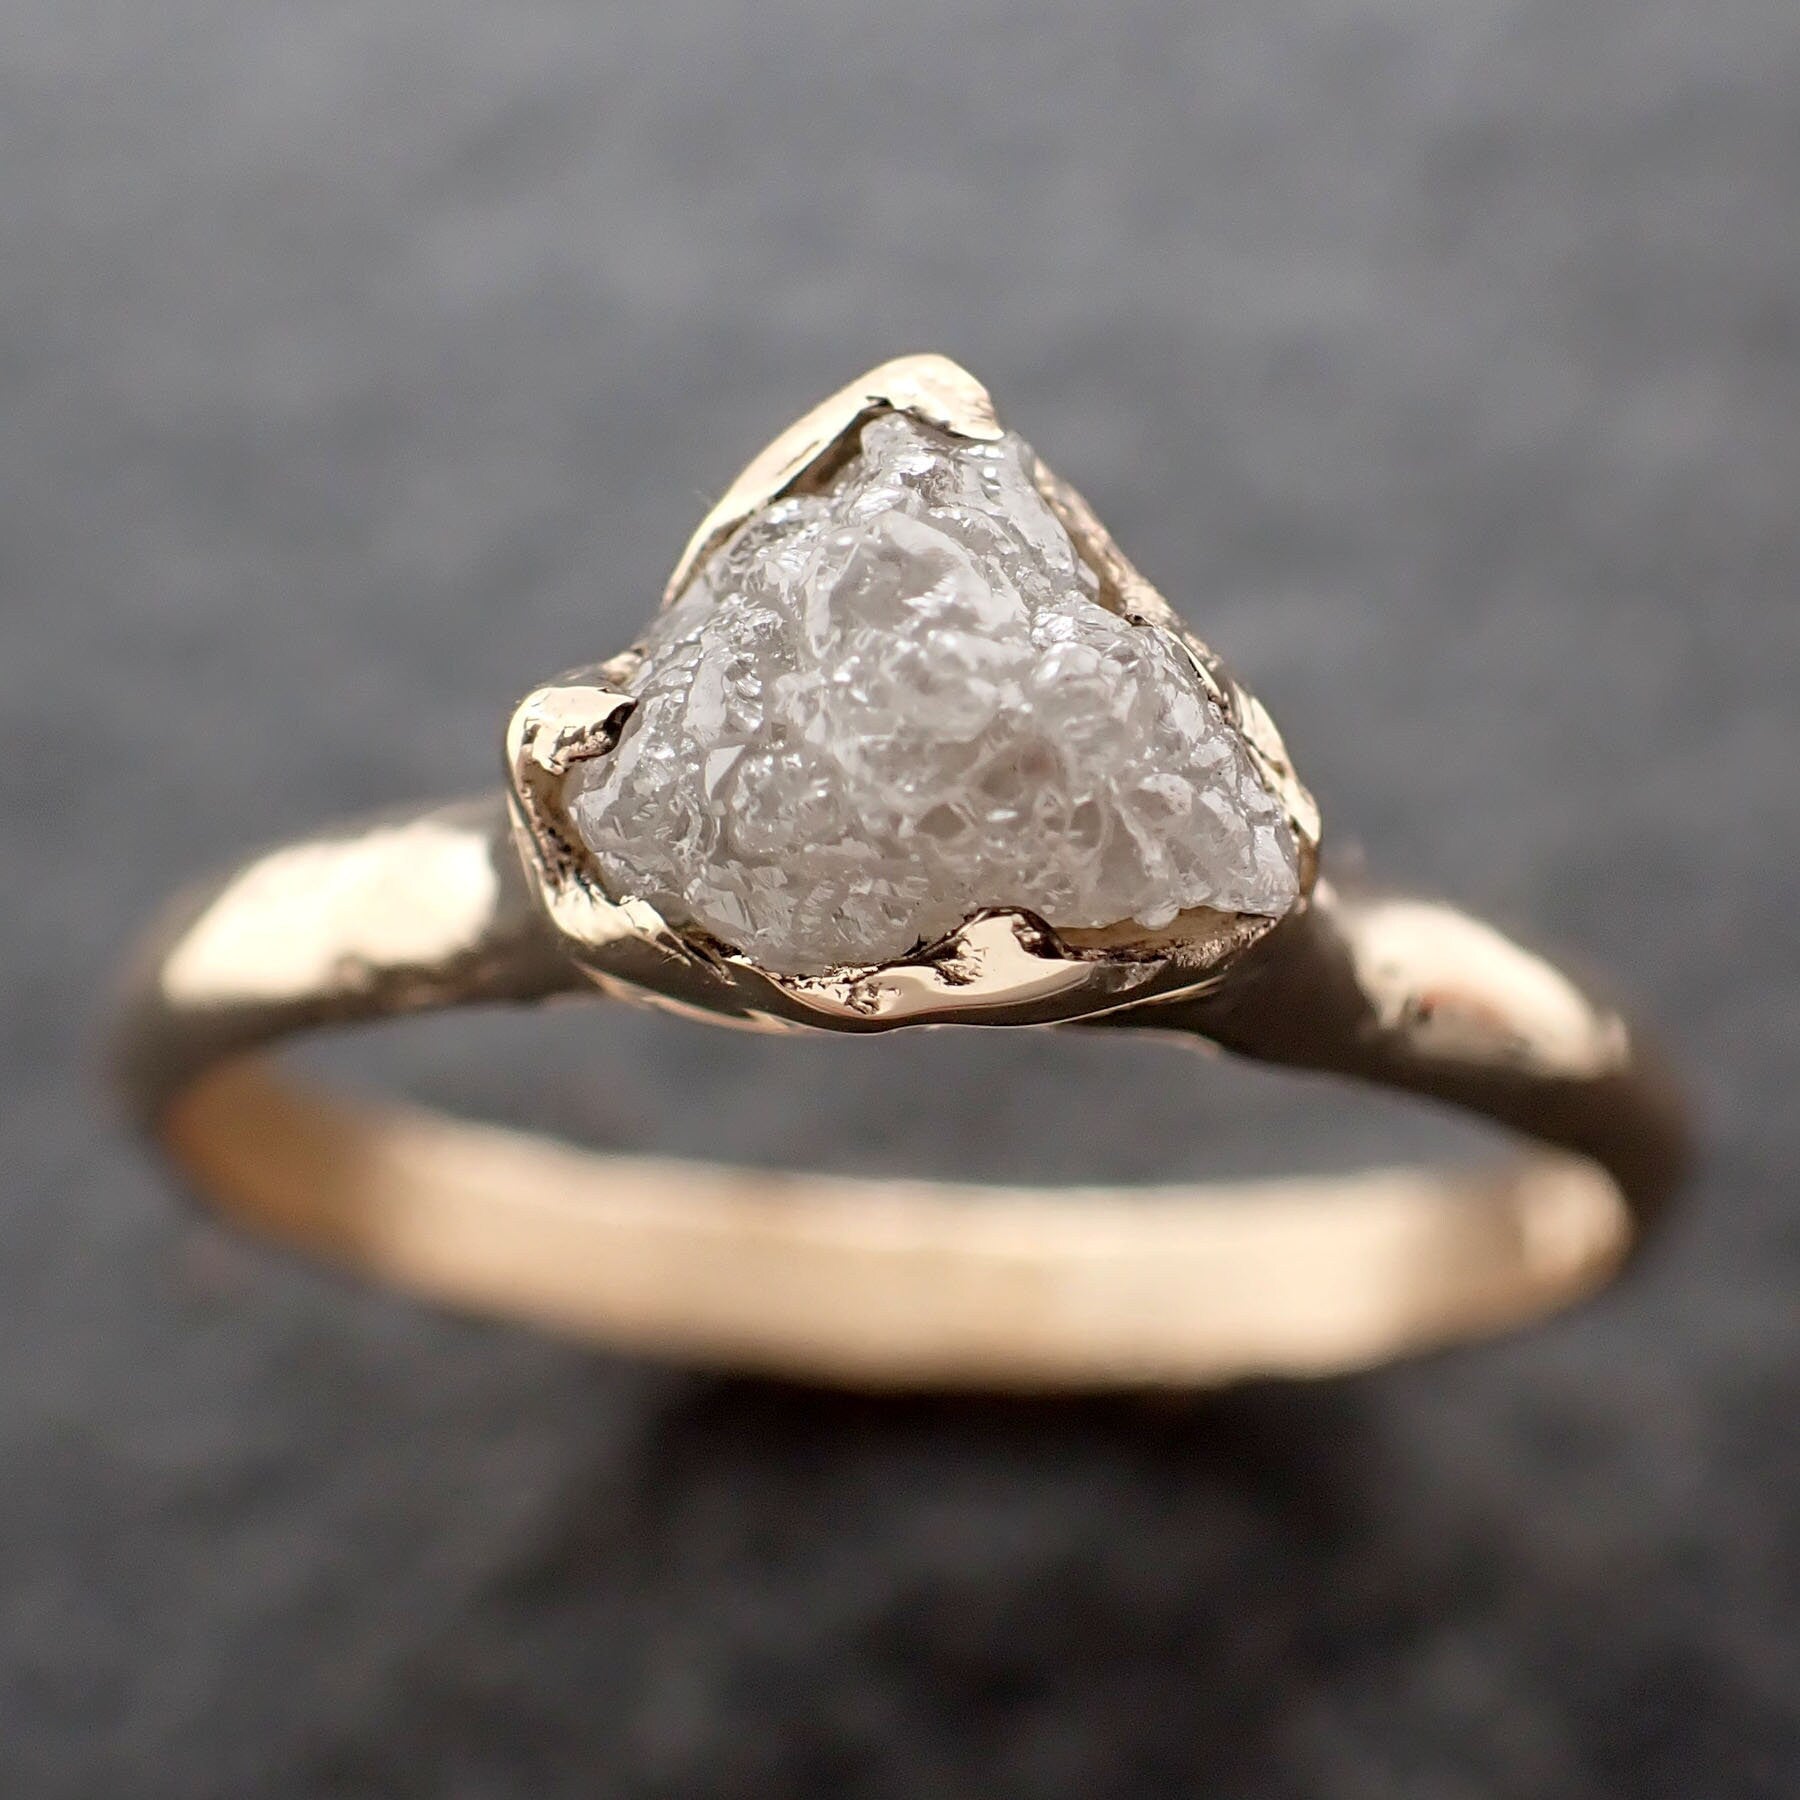 Raw Diamond Engagement Ring Rough Uncut Diamond Solitaire Recycled 14k yellow gold Conflict Free Diamond Wedding Promise 3094